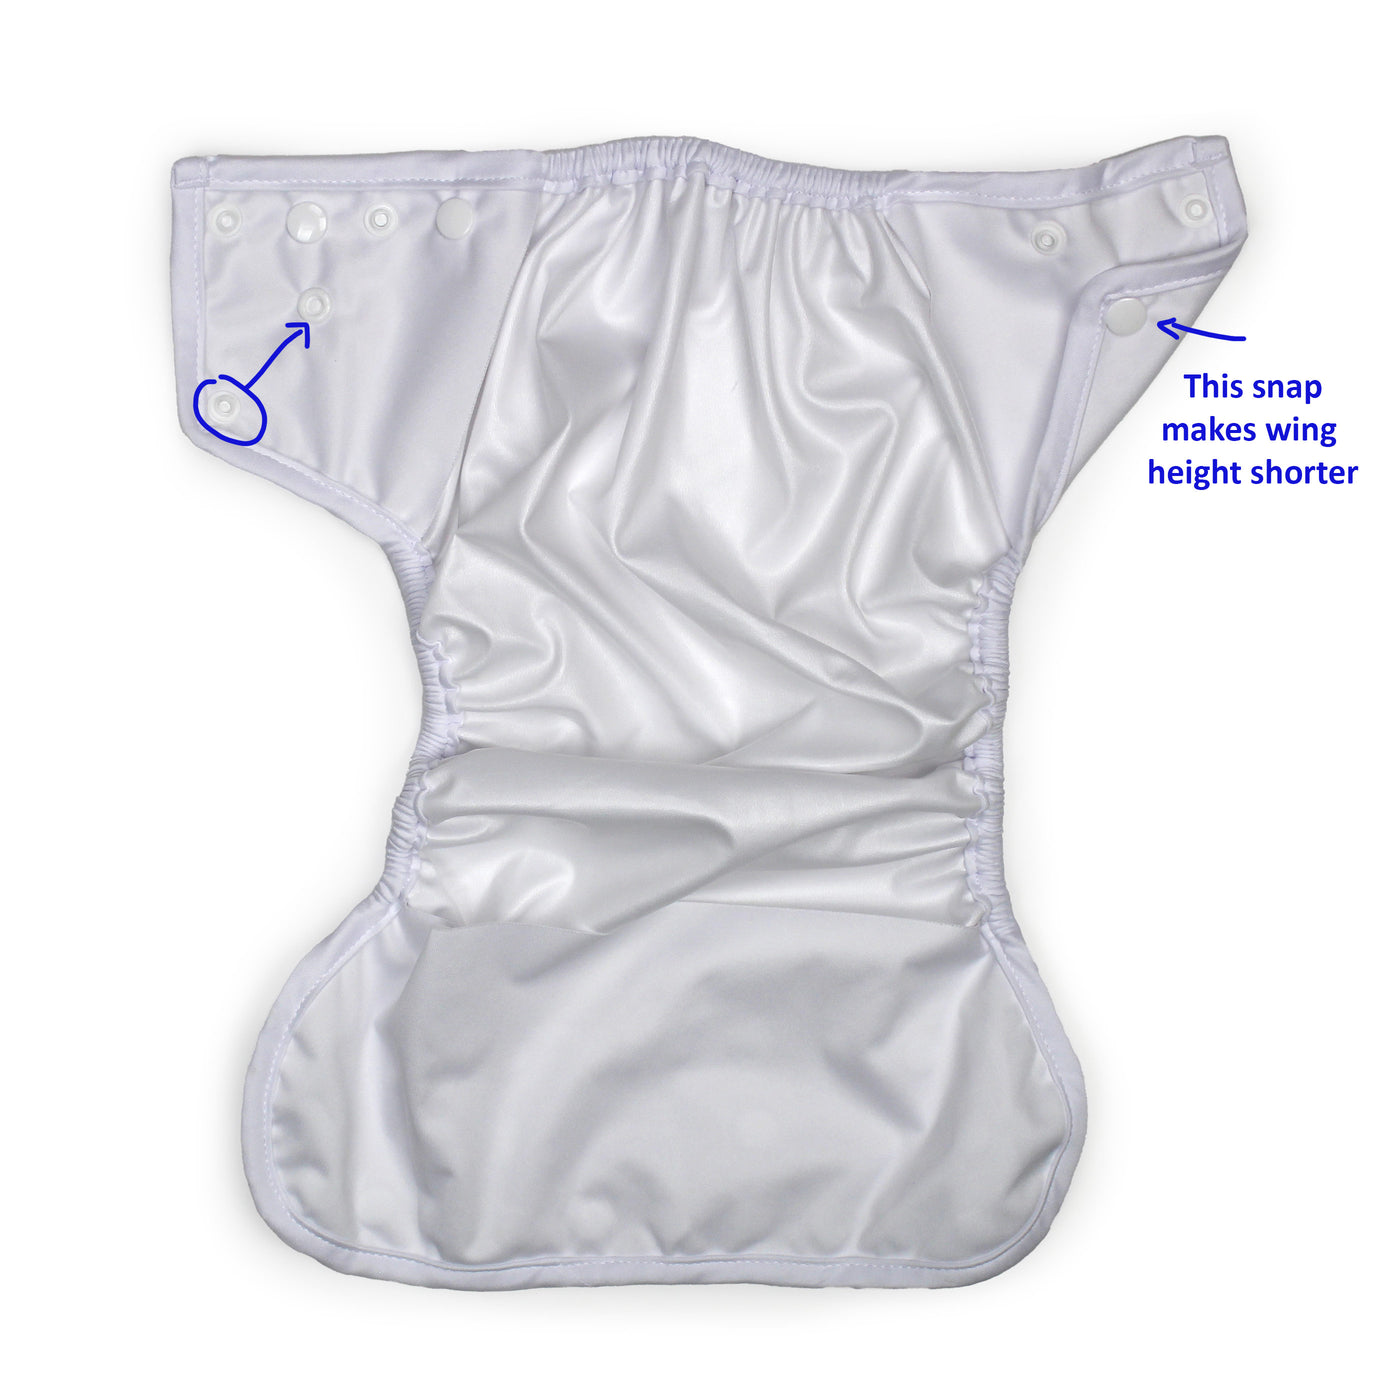 Mommys touch snaps diaper cover